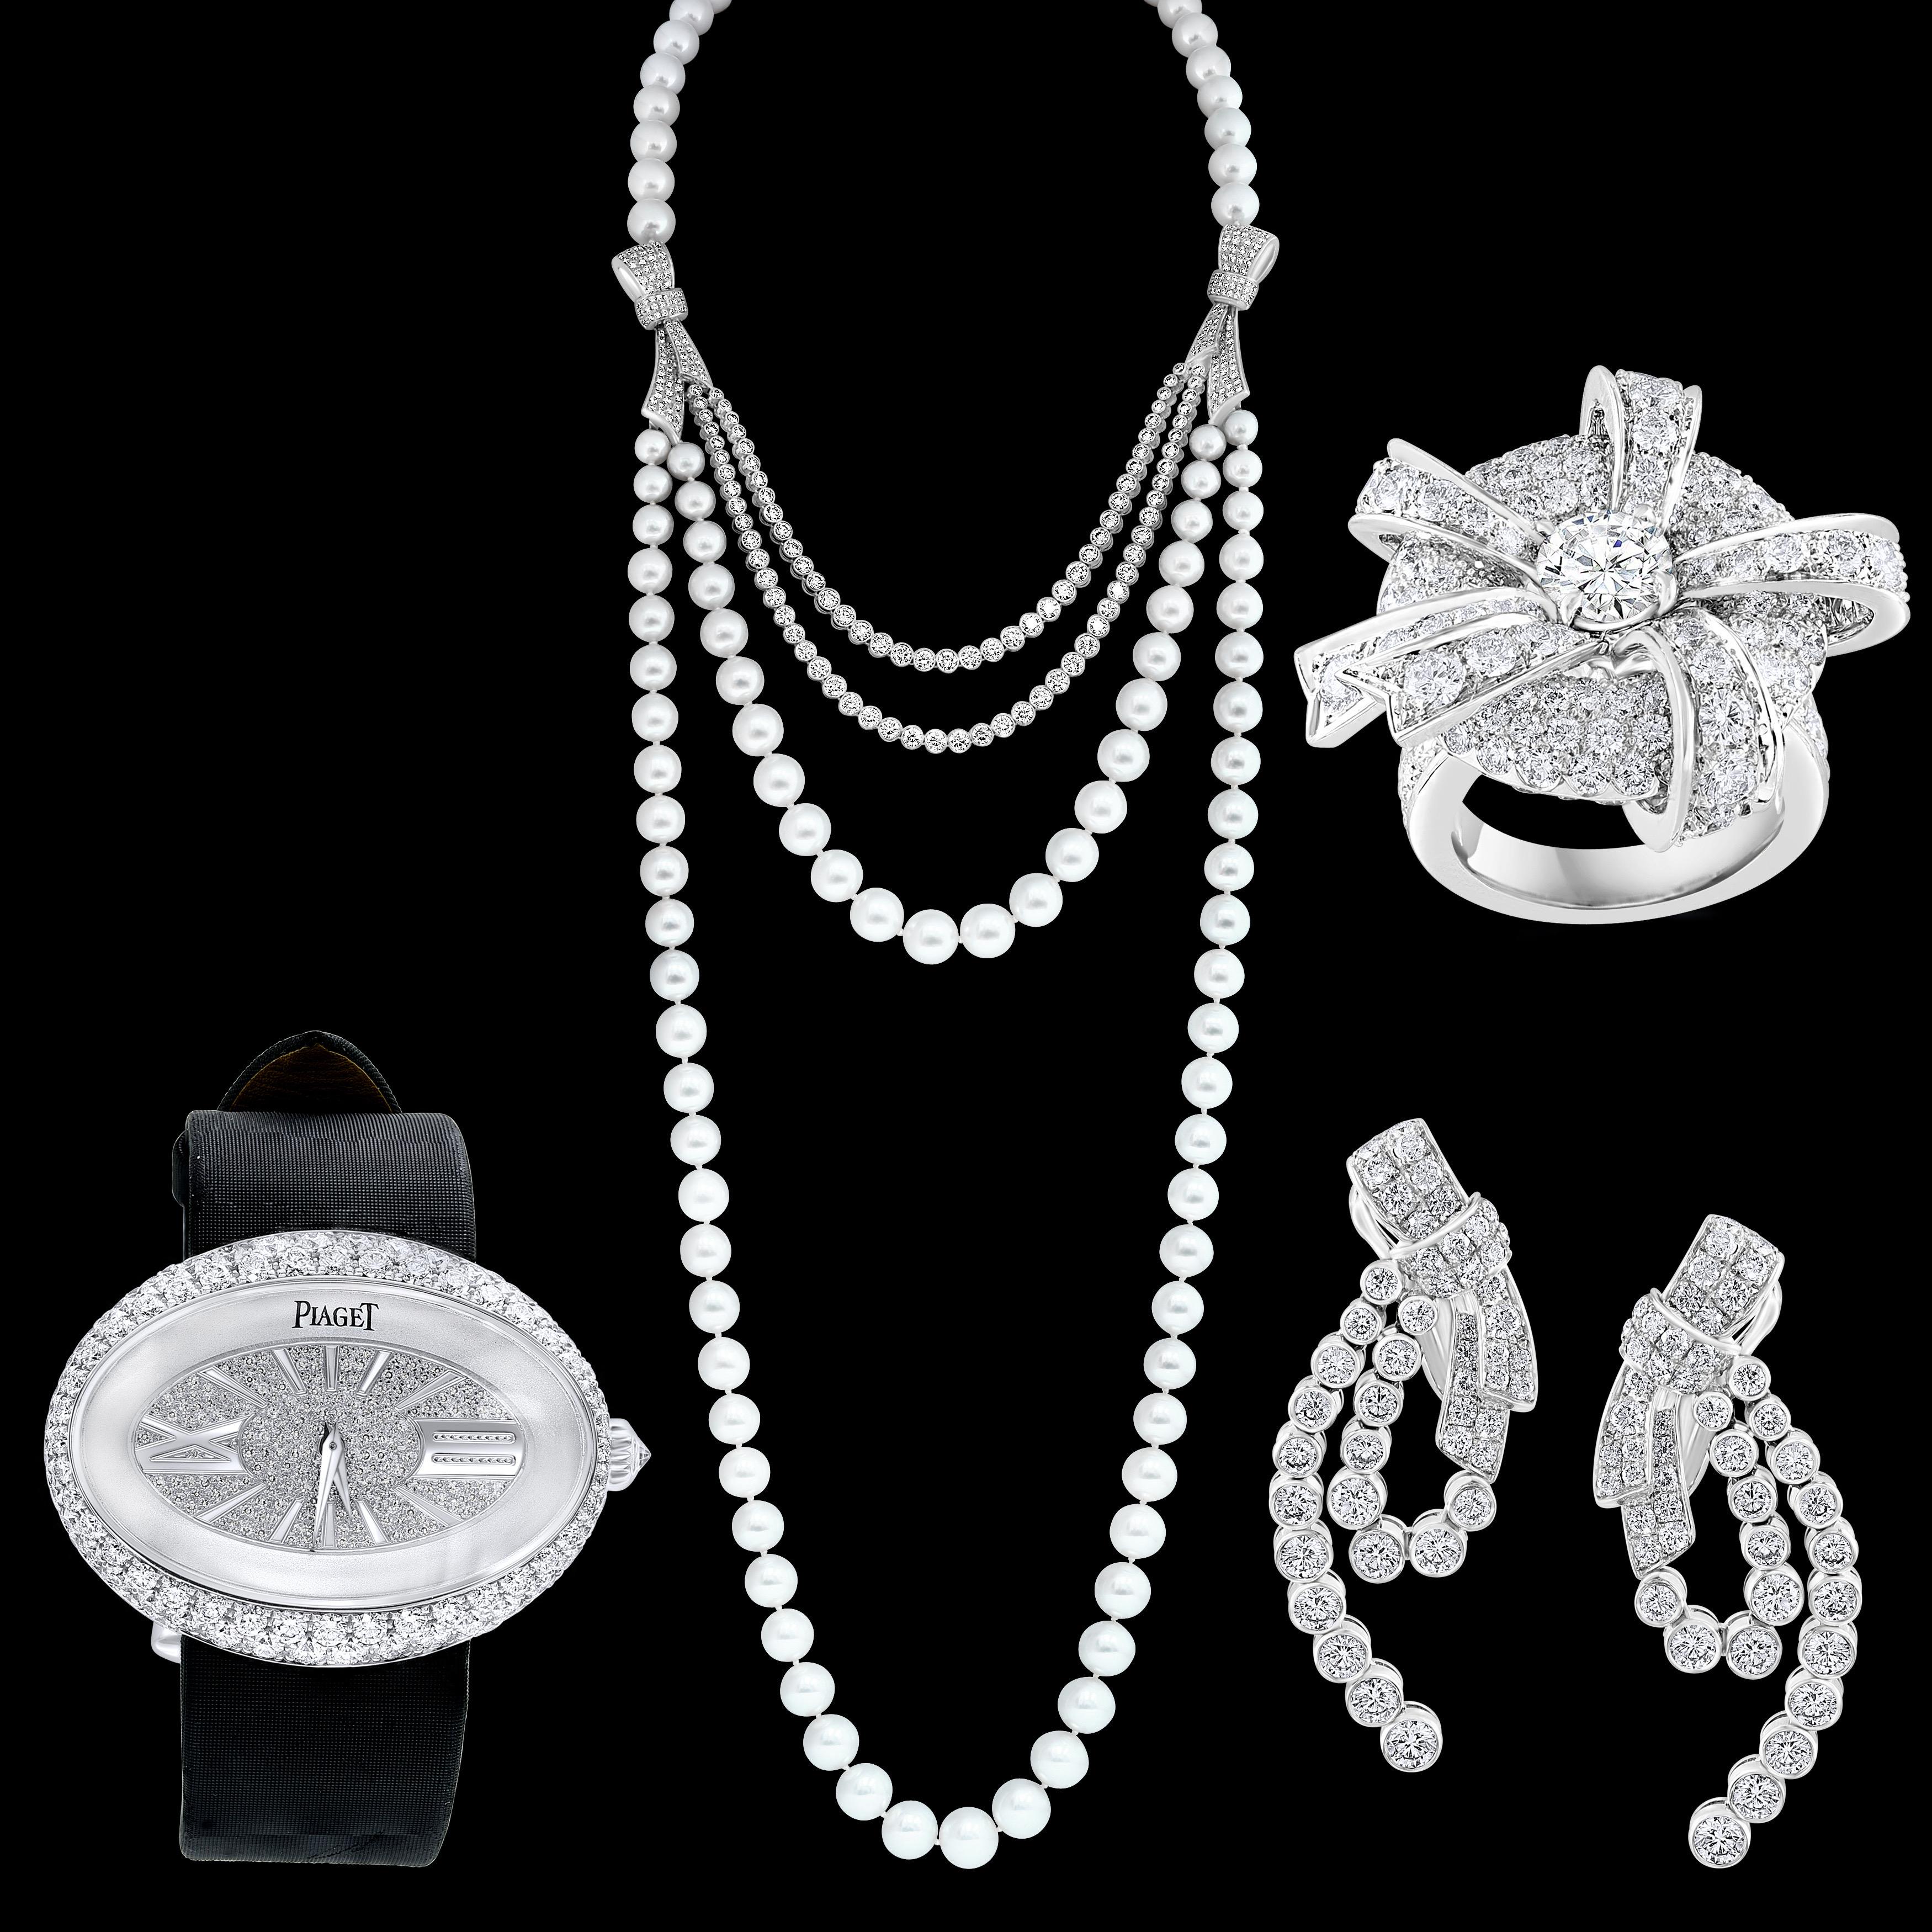 South Sea Pearl & VVS quality Diamonds 4 Piece Set  Necklace, Watch , Earring and Ring Suite 18 Karat White Gold 285 Gm  with Each piece is signed PIAGET , 750 , PT  and serial # 
Full length of the necklace is 36 inches with both pearl string